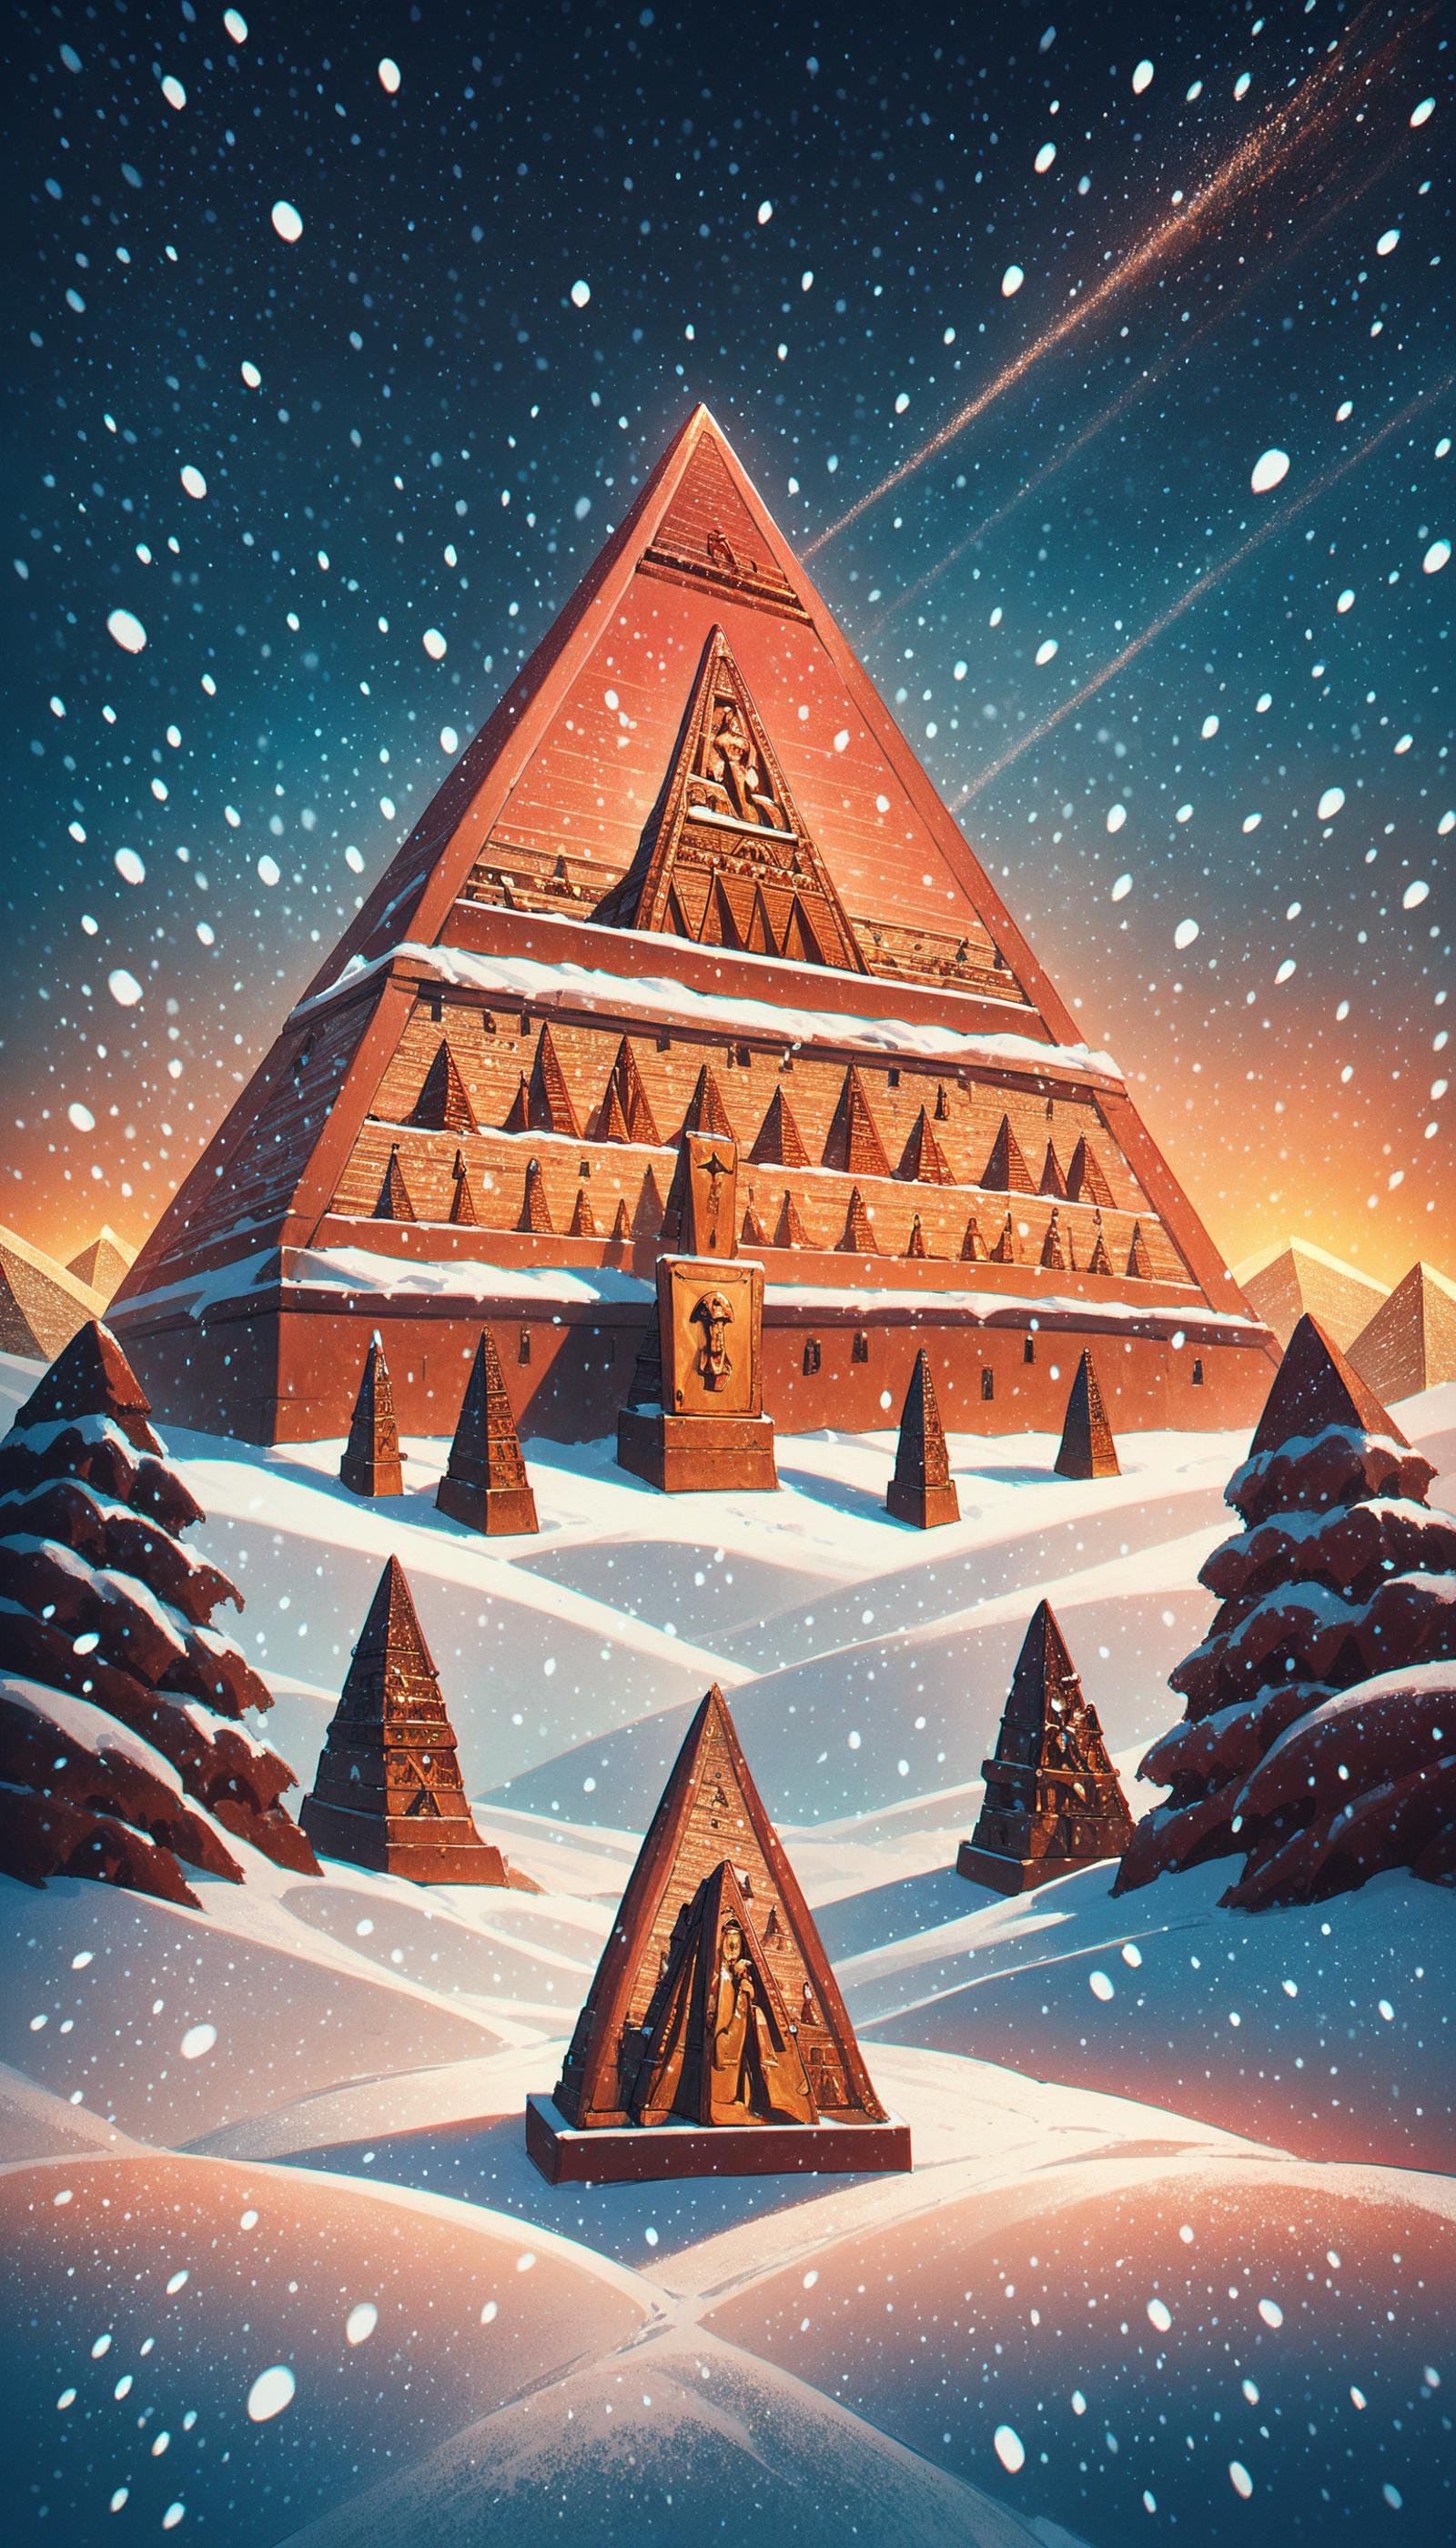 score_9, score_8_up, score_7_up, score_6_up, <lora:ChristmasWinteryPony:0.6> ChristmasWintery architects planning the layout of a pyramid in ancient Egypt, snowing, cold, blizzard, snow on top, (Masterpiece:1.3) (best quality:1.2) (high quality:1.1)